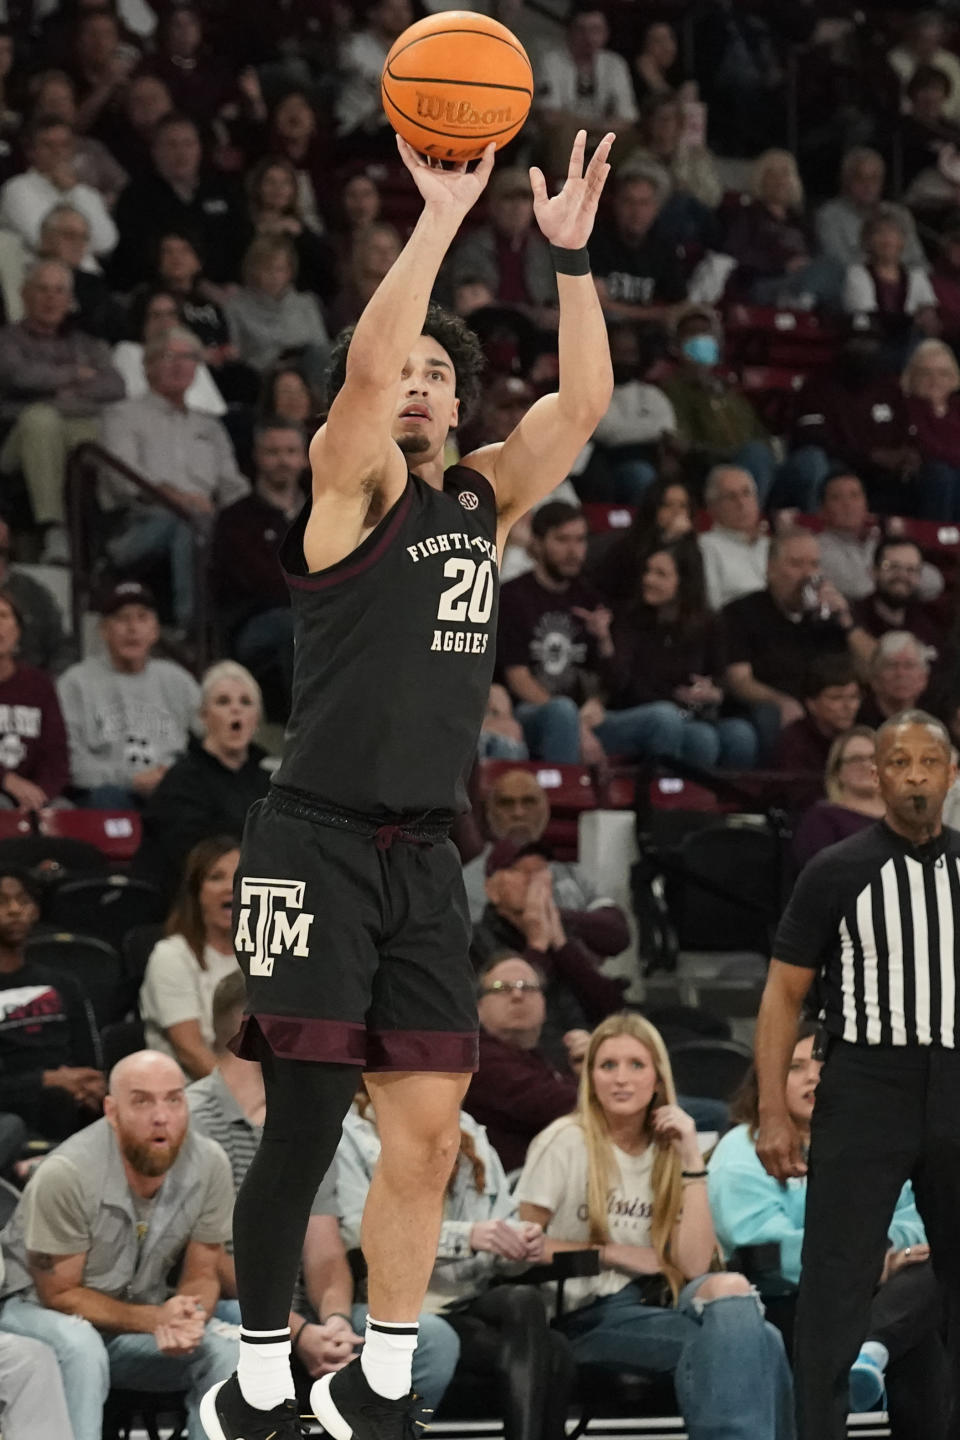 Texas A&M guard Andre Gordon (20) is unguarded as he attempts a three-point shot during the first half of an NCAA college basketball game against Mississippi State in Starkville, Miss., Saturday, Feb. 25, 2023. (AP Photo/Rogelio V. Solis)